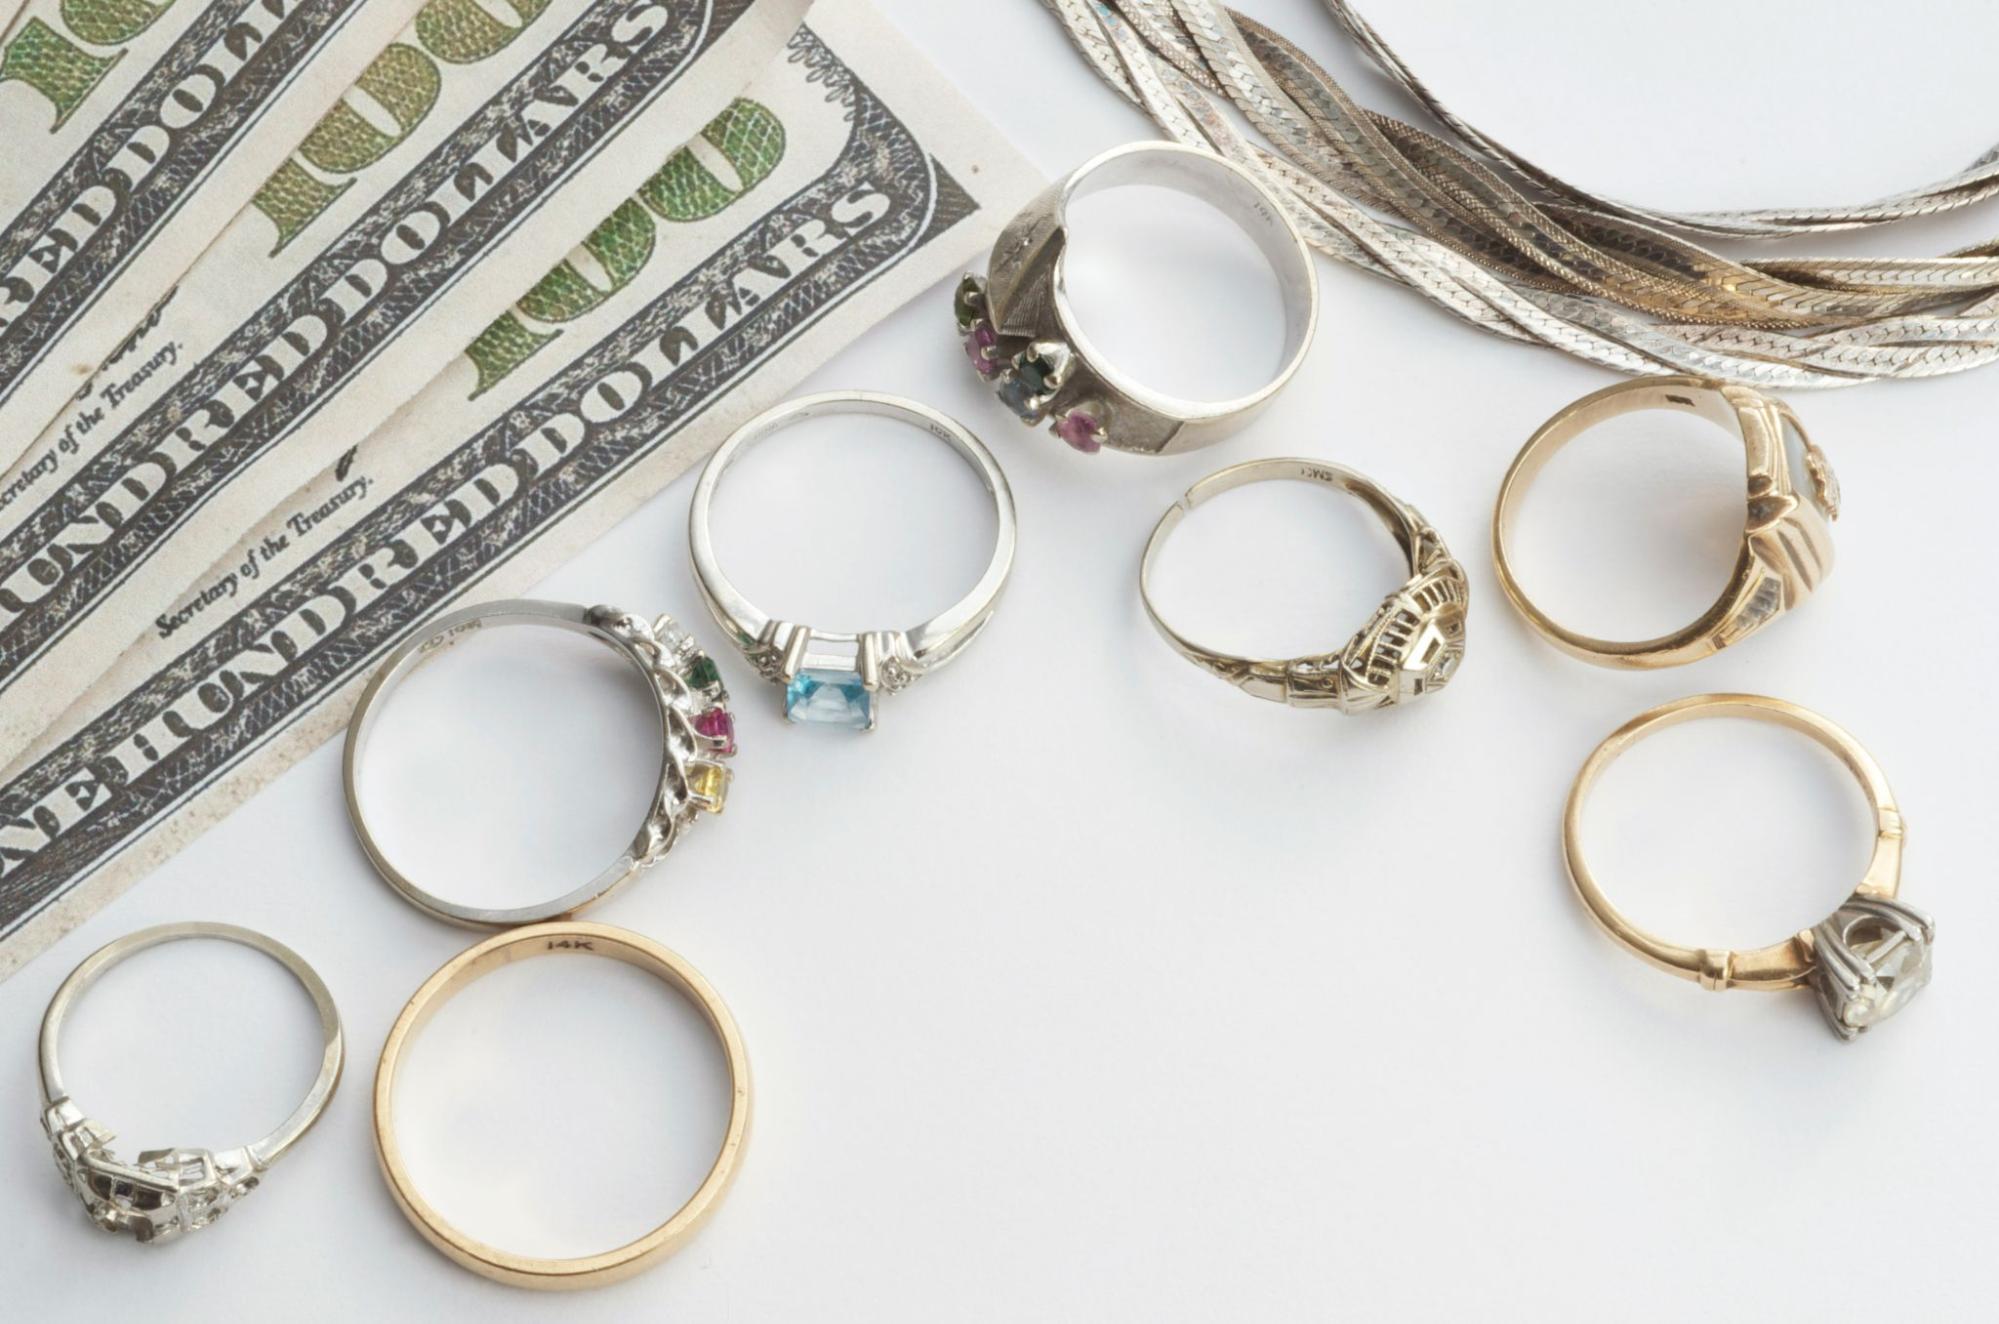 A collecttion of rings sits on a white table with cash in the background